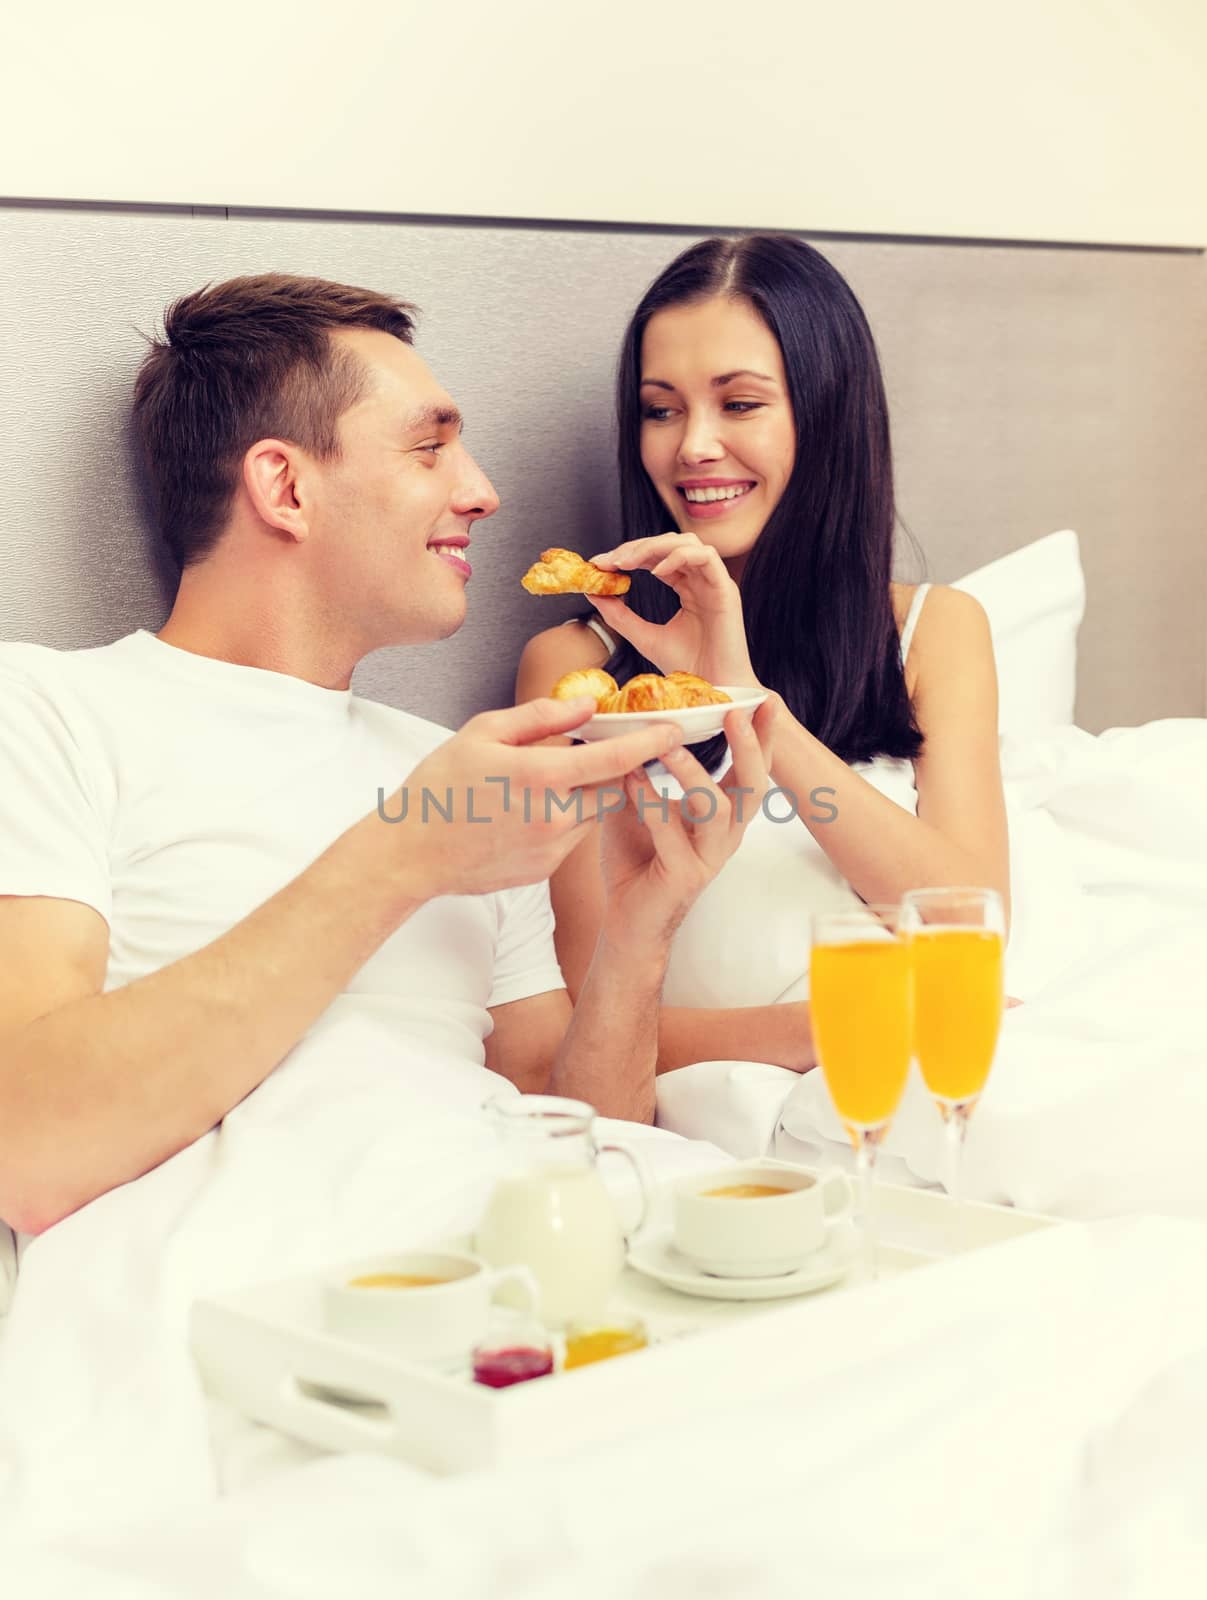 hotel, travel, relationships and happiness concept - smiling couple having breakfast in bed in hotel room